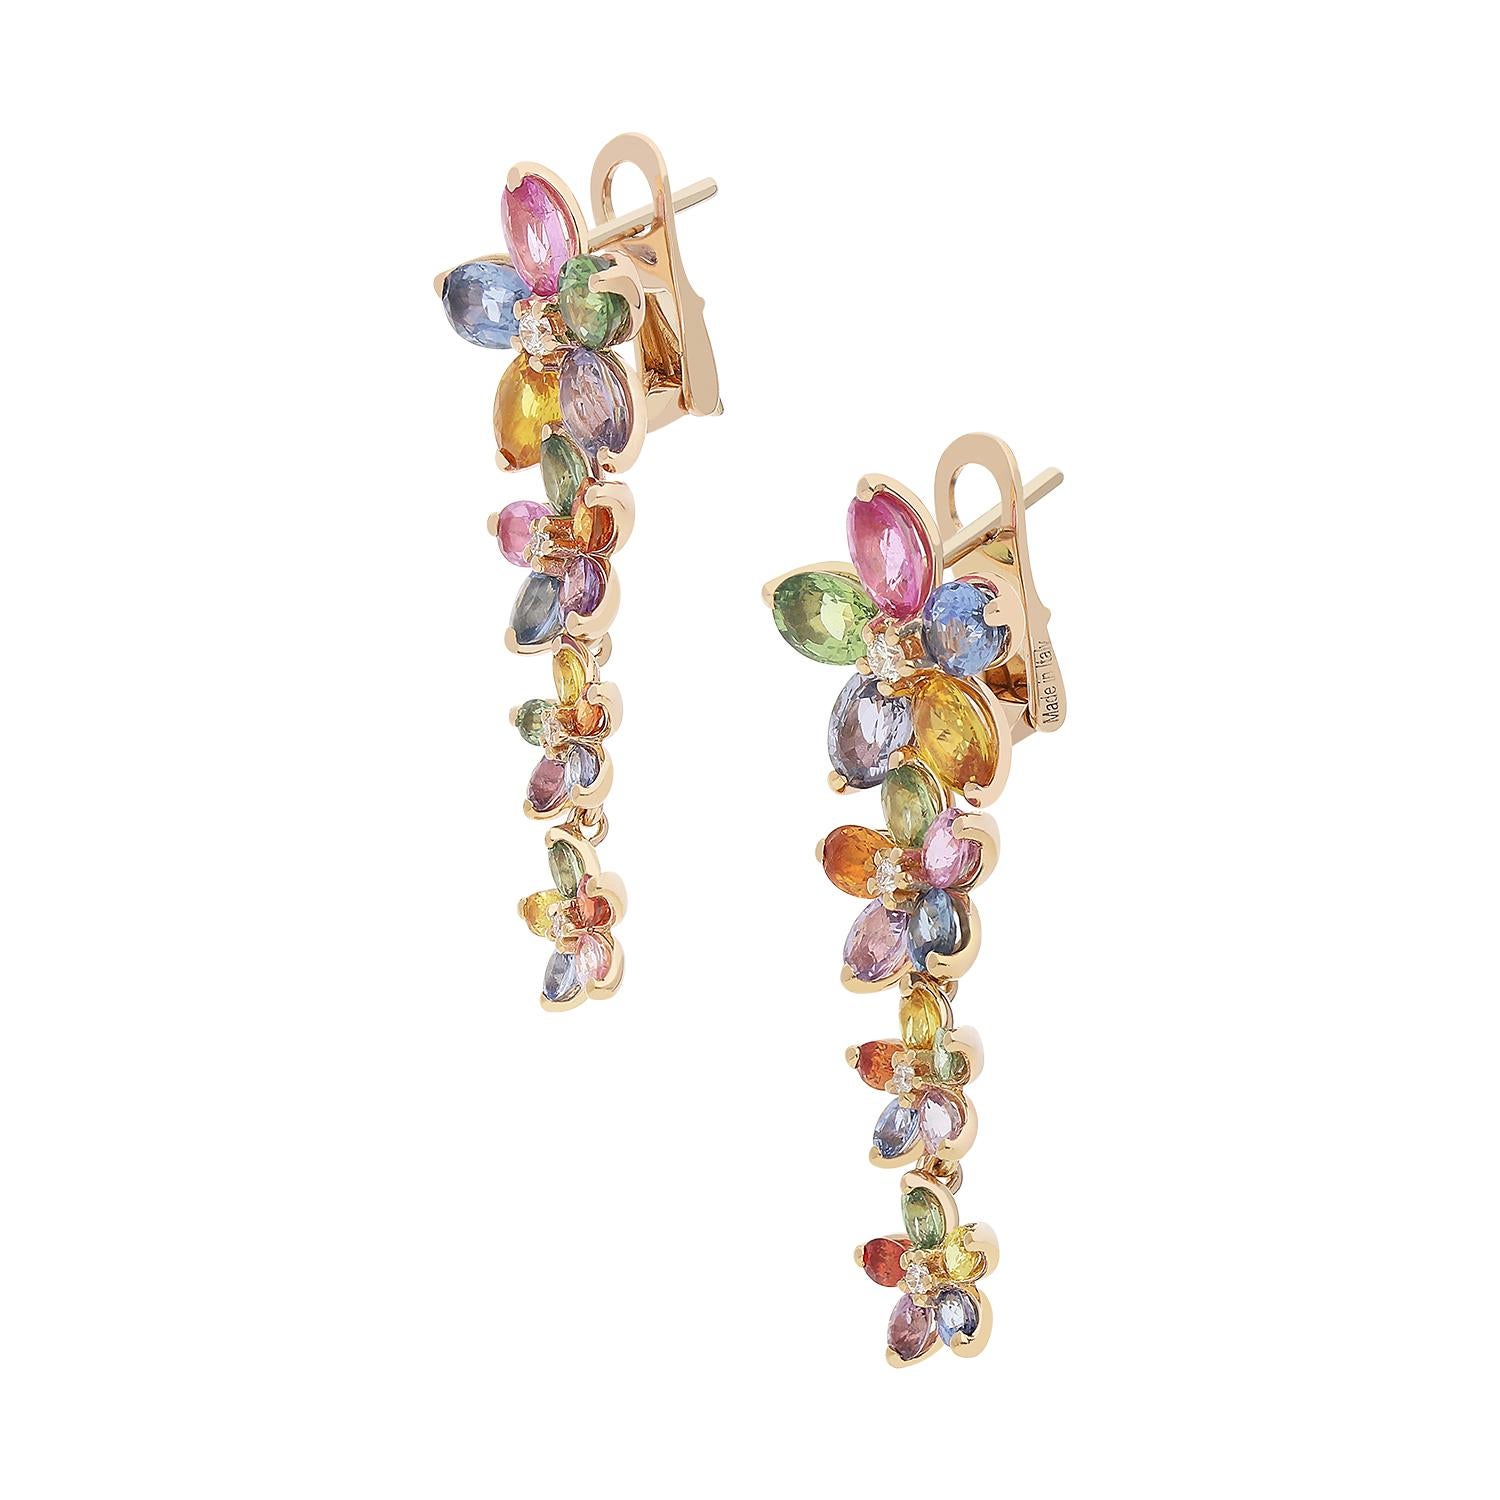 Gorgeous 18kt rose gold dangle earrings weighing a total of 8.00 grams, consisting of four flowers per earring. Each flower bears a brilliant-cut diamond in the center, color G and SI clarity, and the petals are multicolored oval-cut sapphires. The